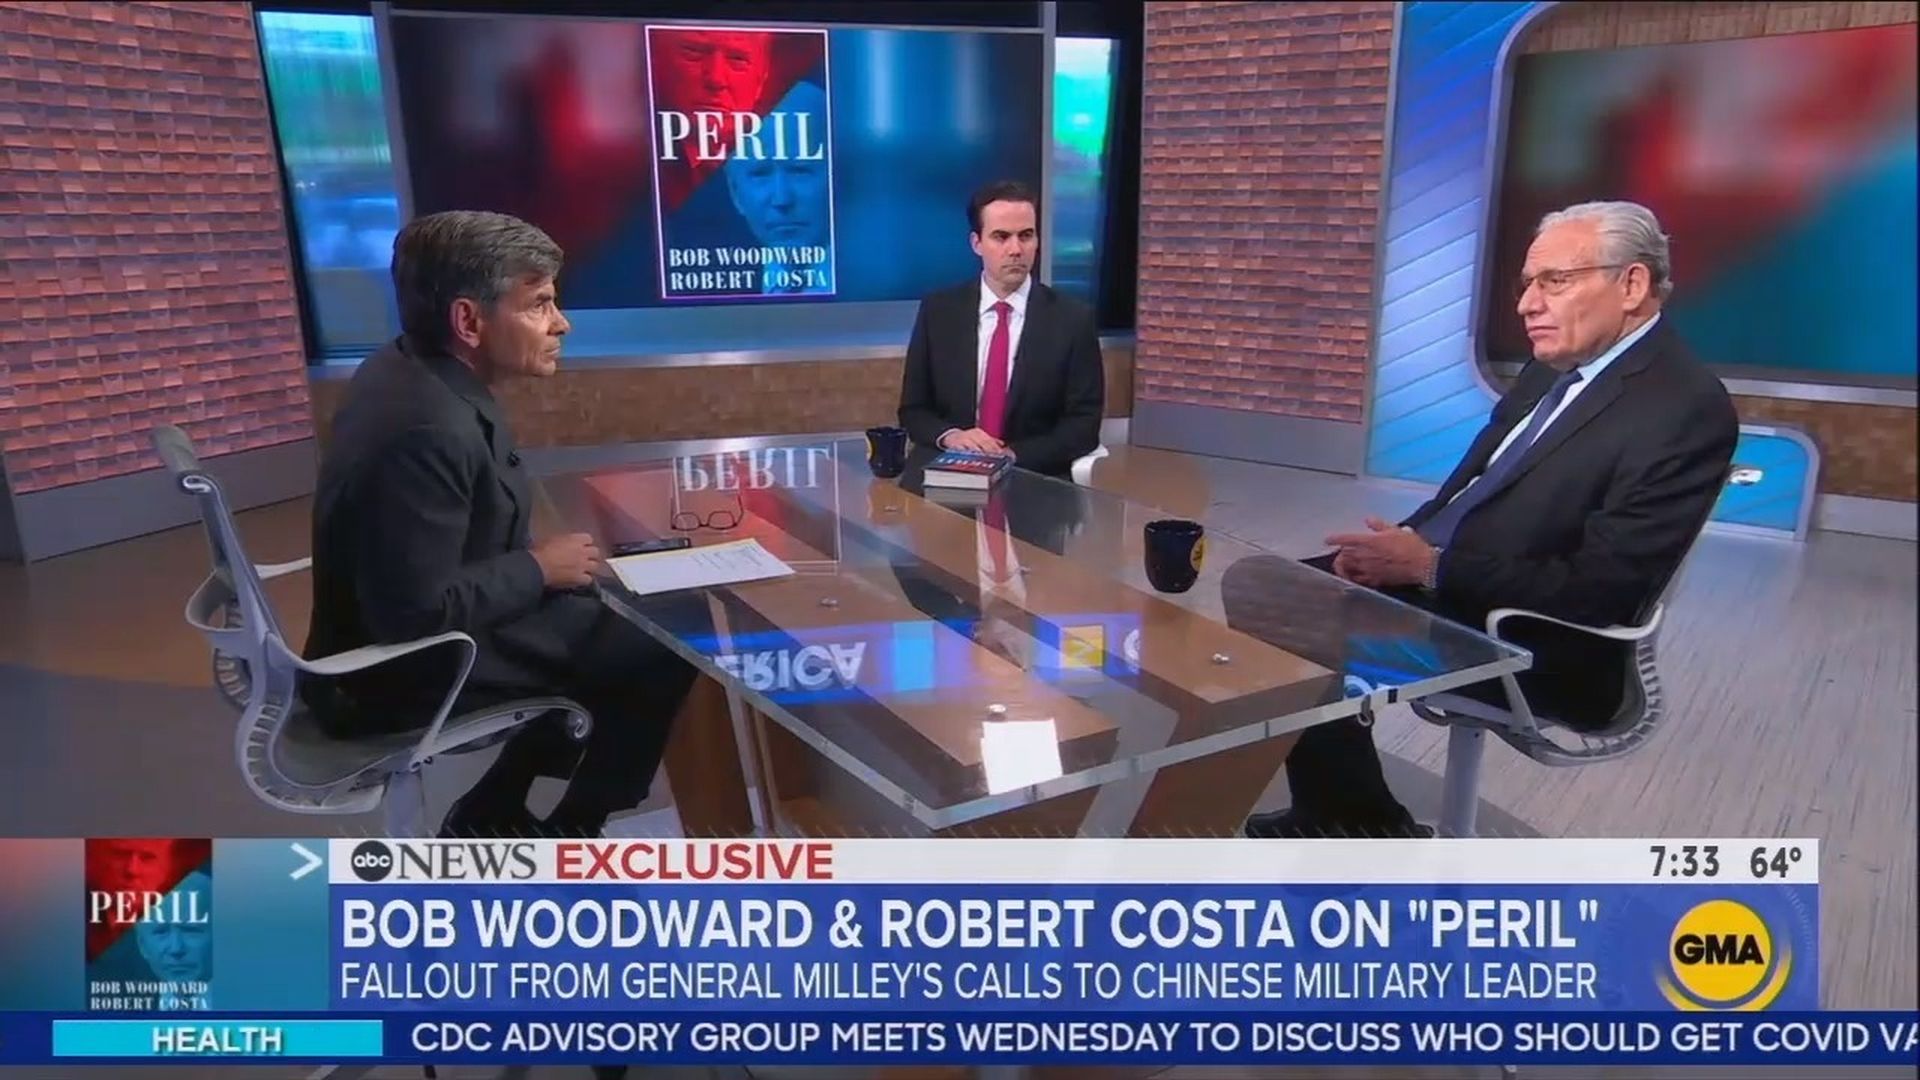 George Stephanopoulos interviews Robert Costa and Bob Woodward on Monday.